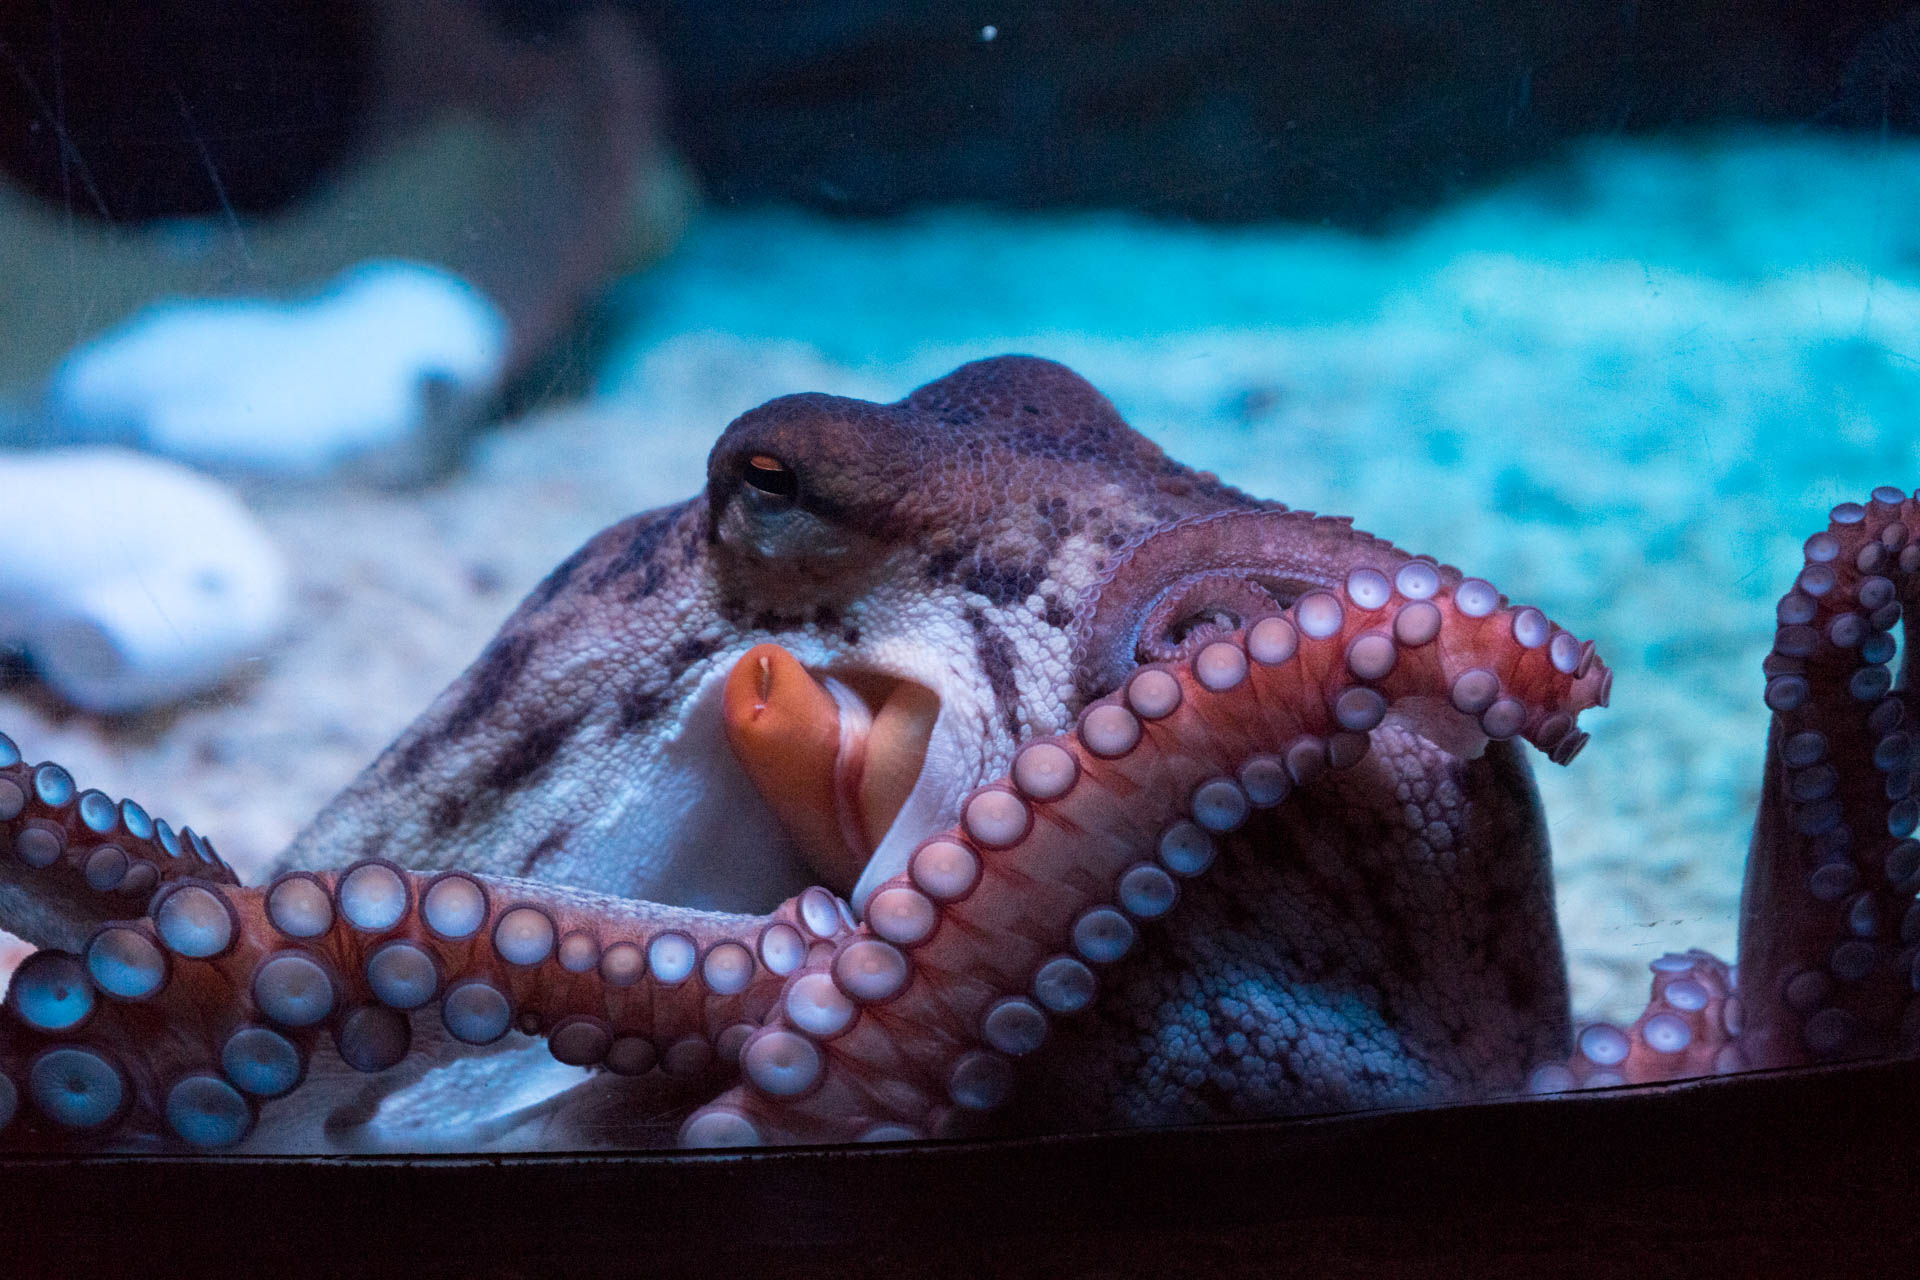 an octo with its mouth open sitting in an aquarium